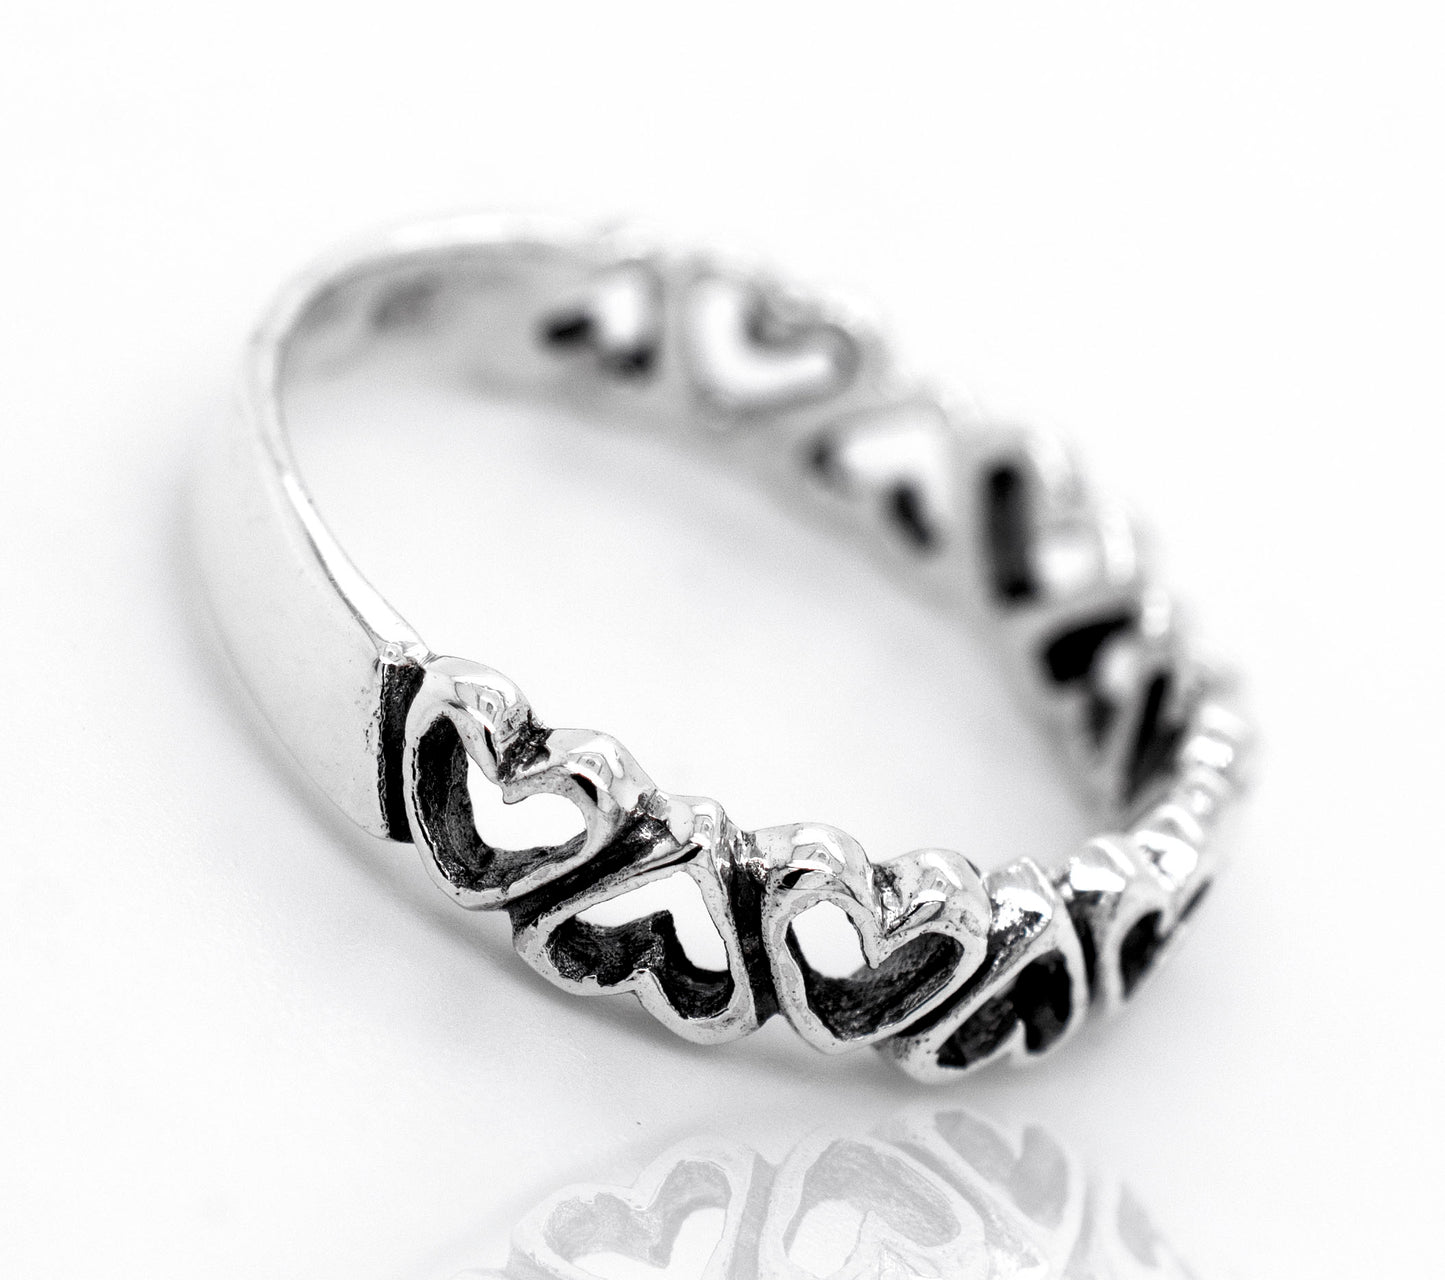 A minimalist silver Cut Out Alternating Heart Band, perfect for expressing love.